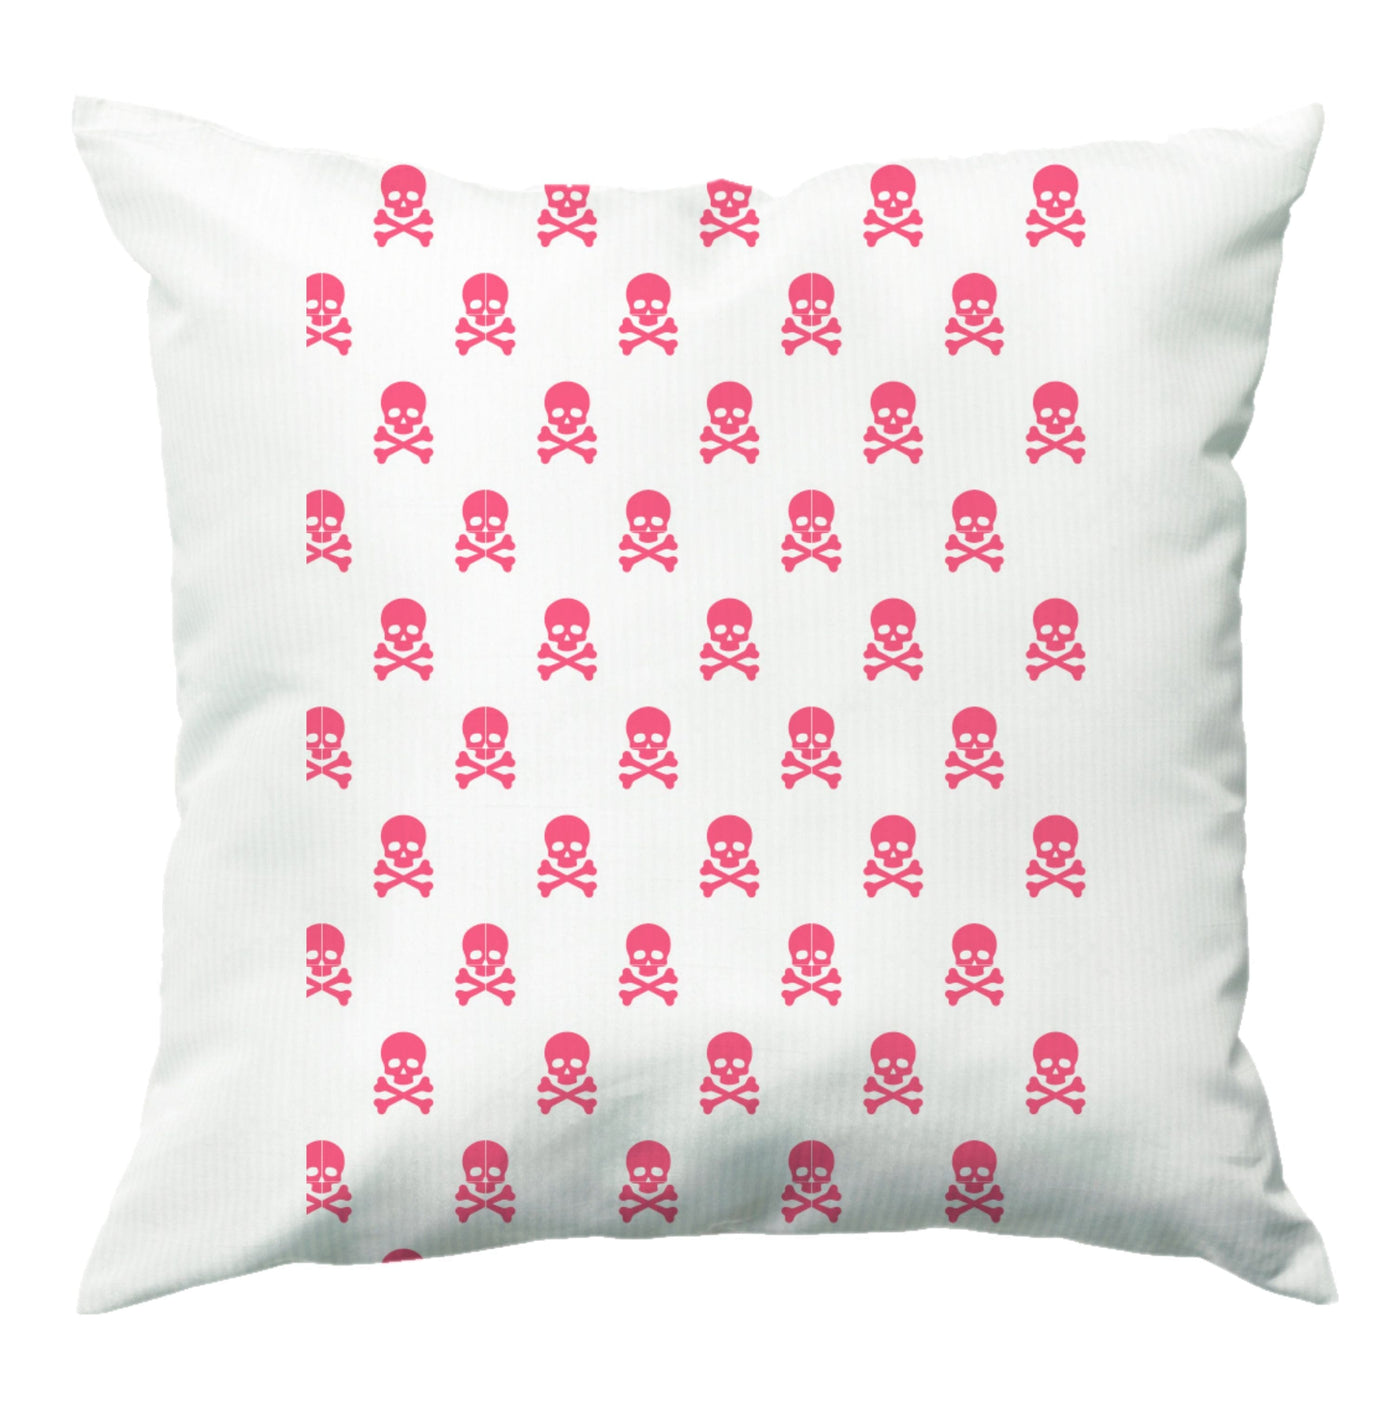 Whats Your Poison - Halloween Cushion